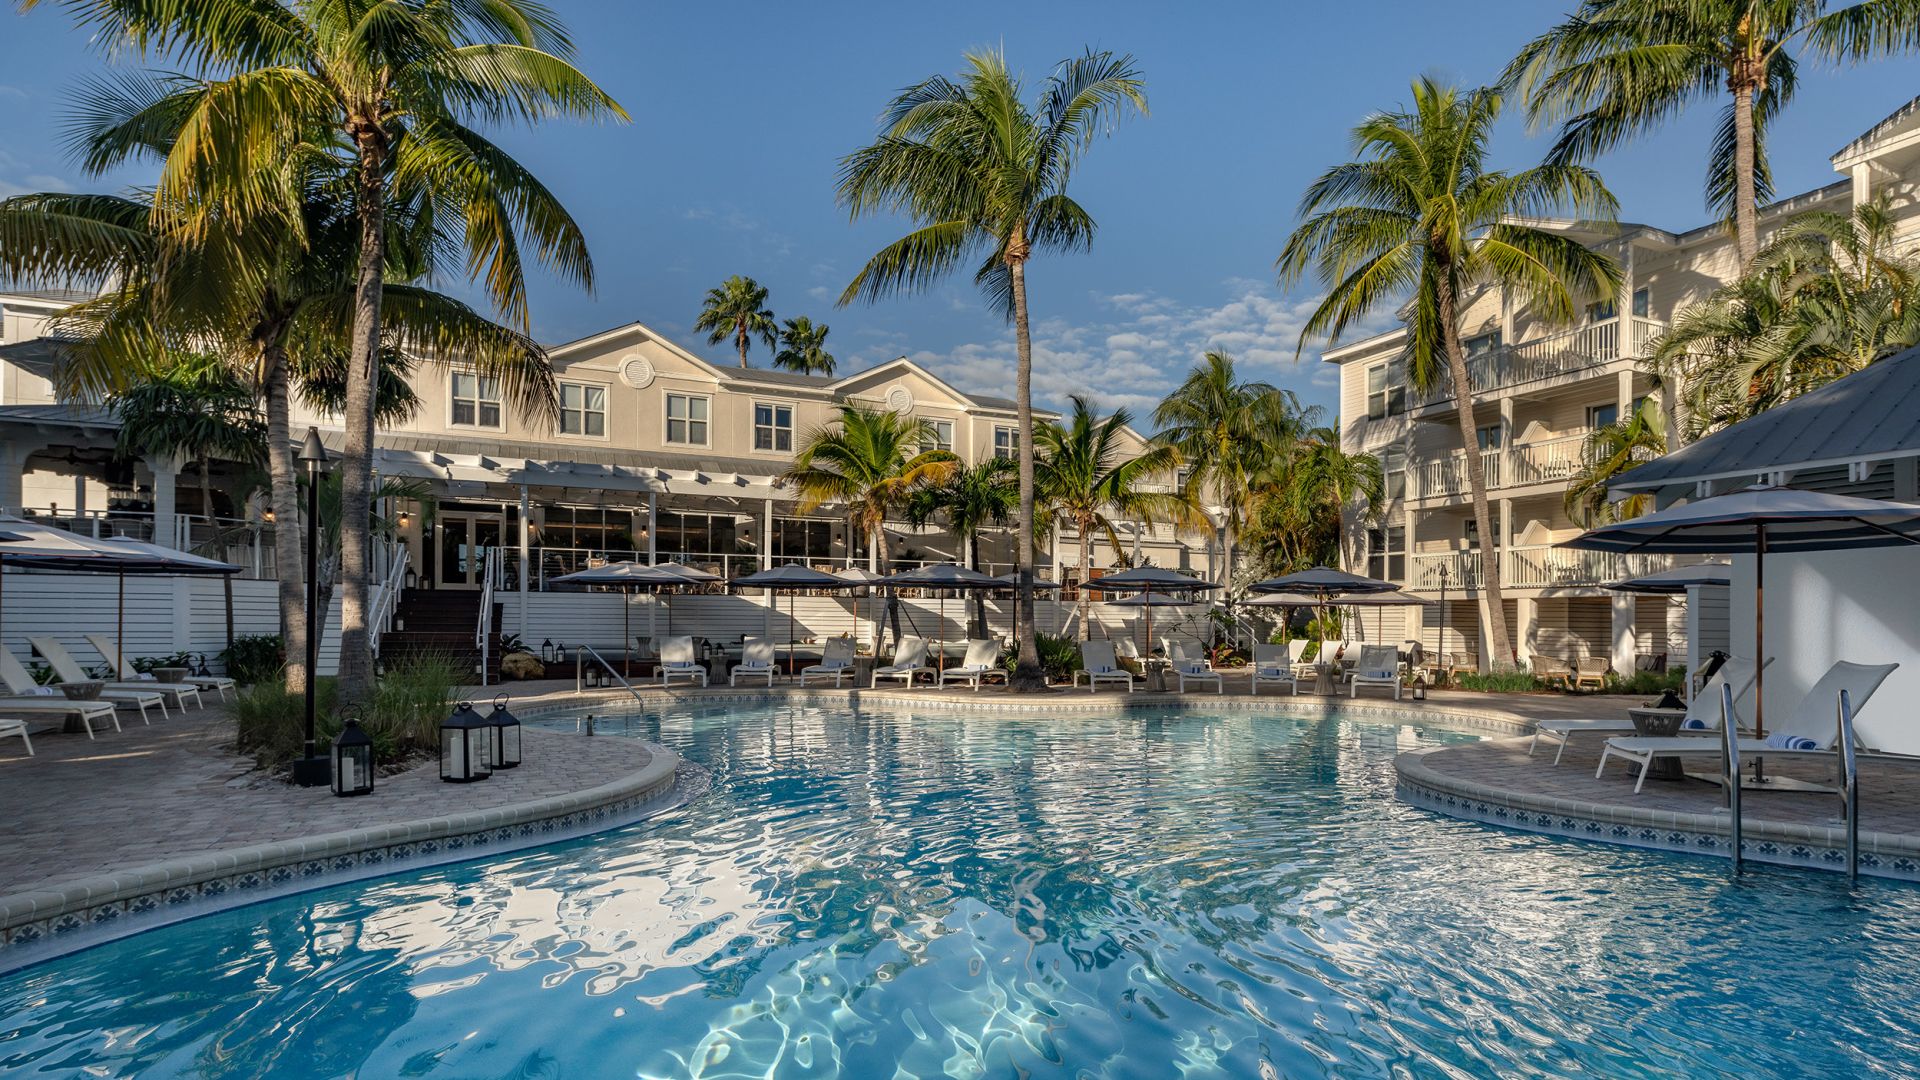 Where to Stay in Key West?